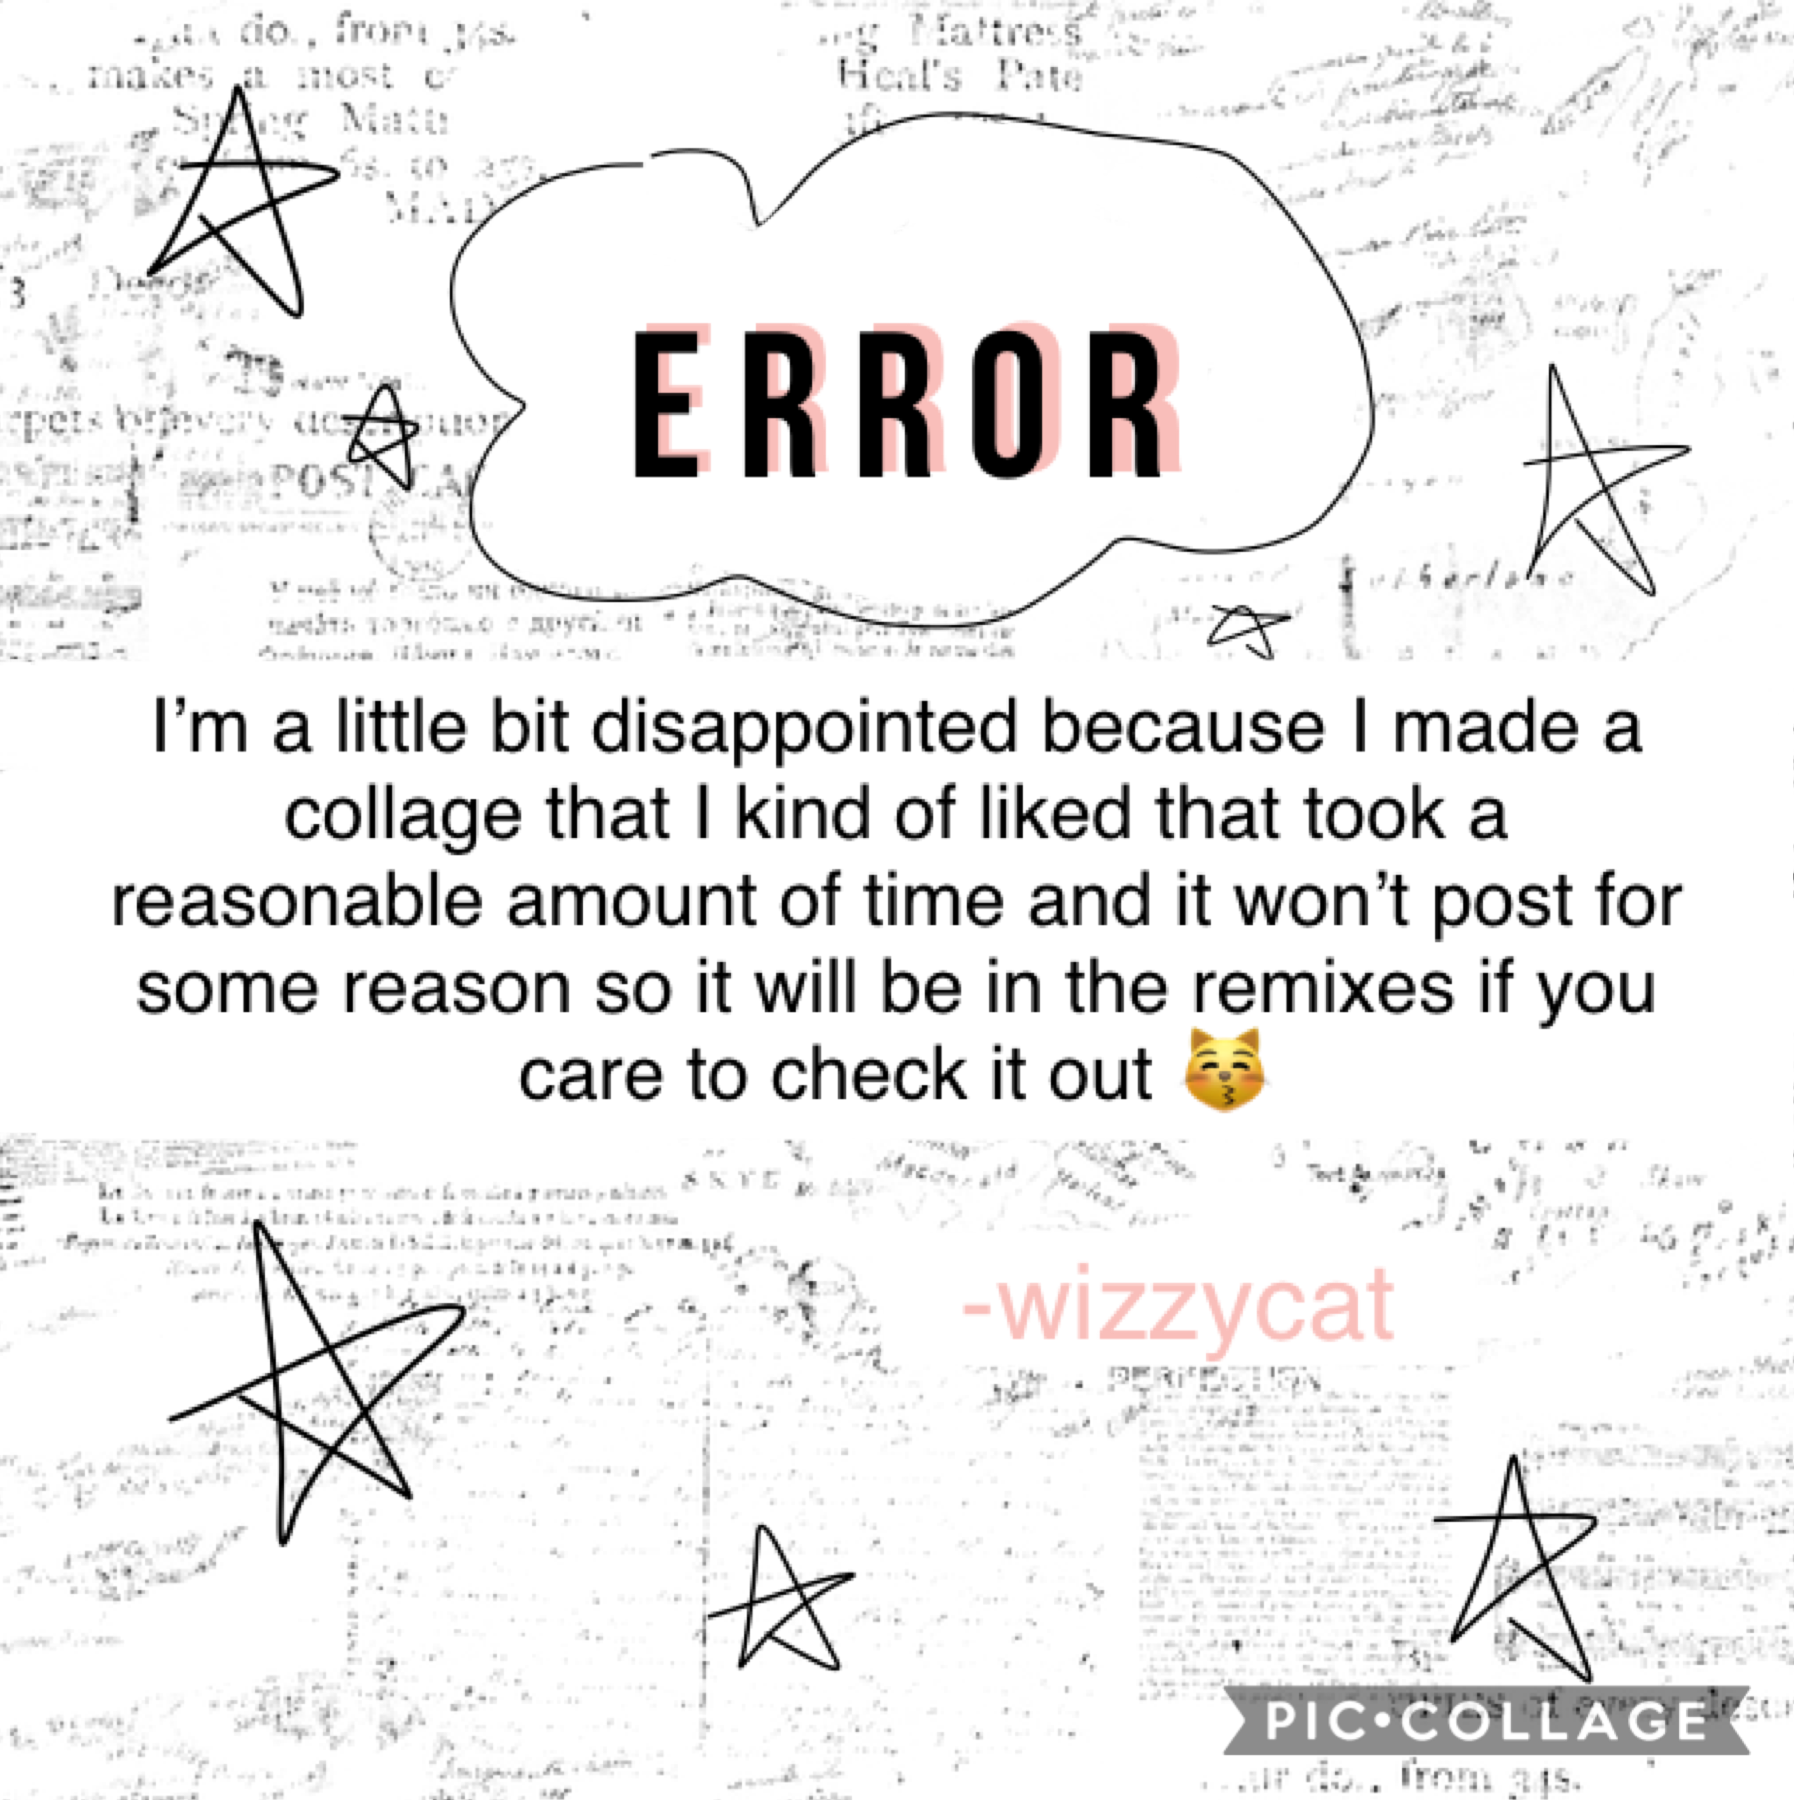 •

thank you!!

sorry for the inconvenience, piccollage is being mean to me >:(